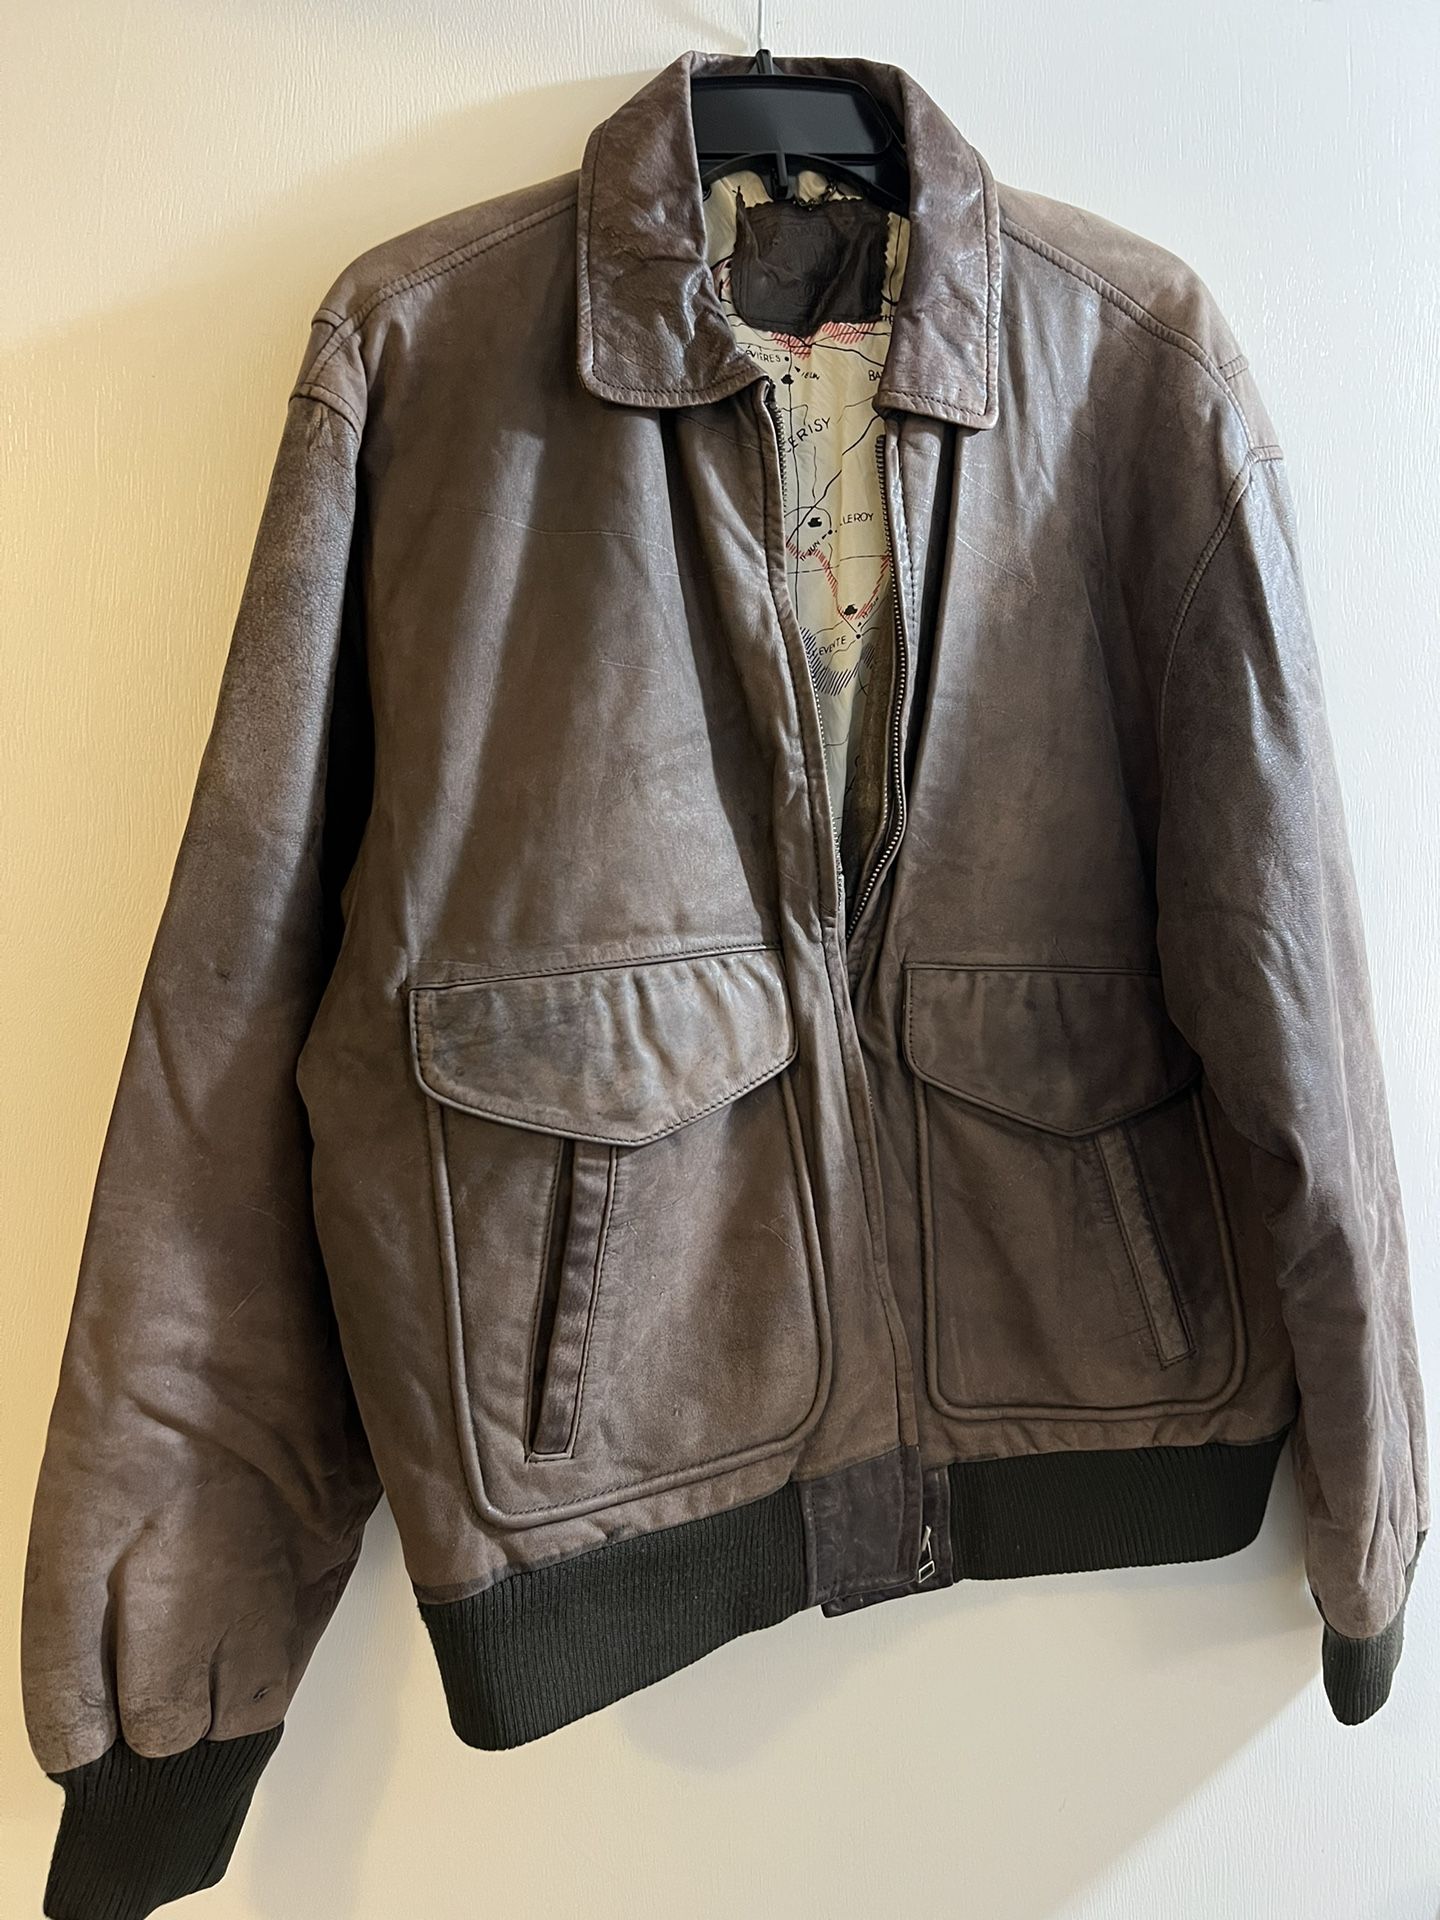 light brown leather bomber jacket size 40R